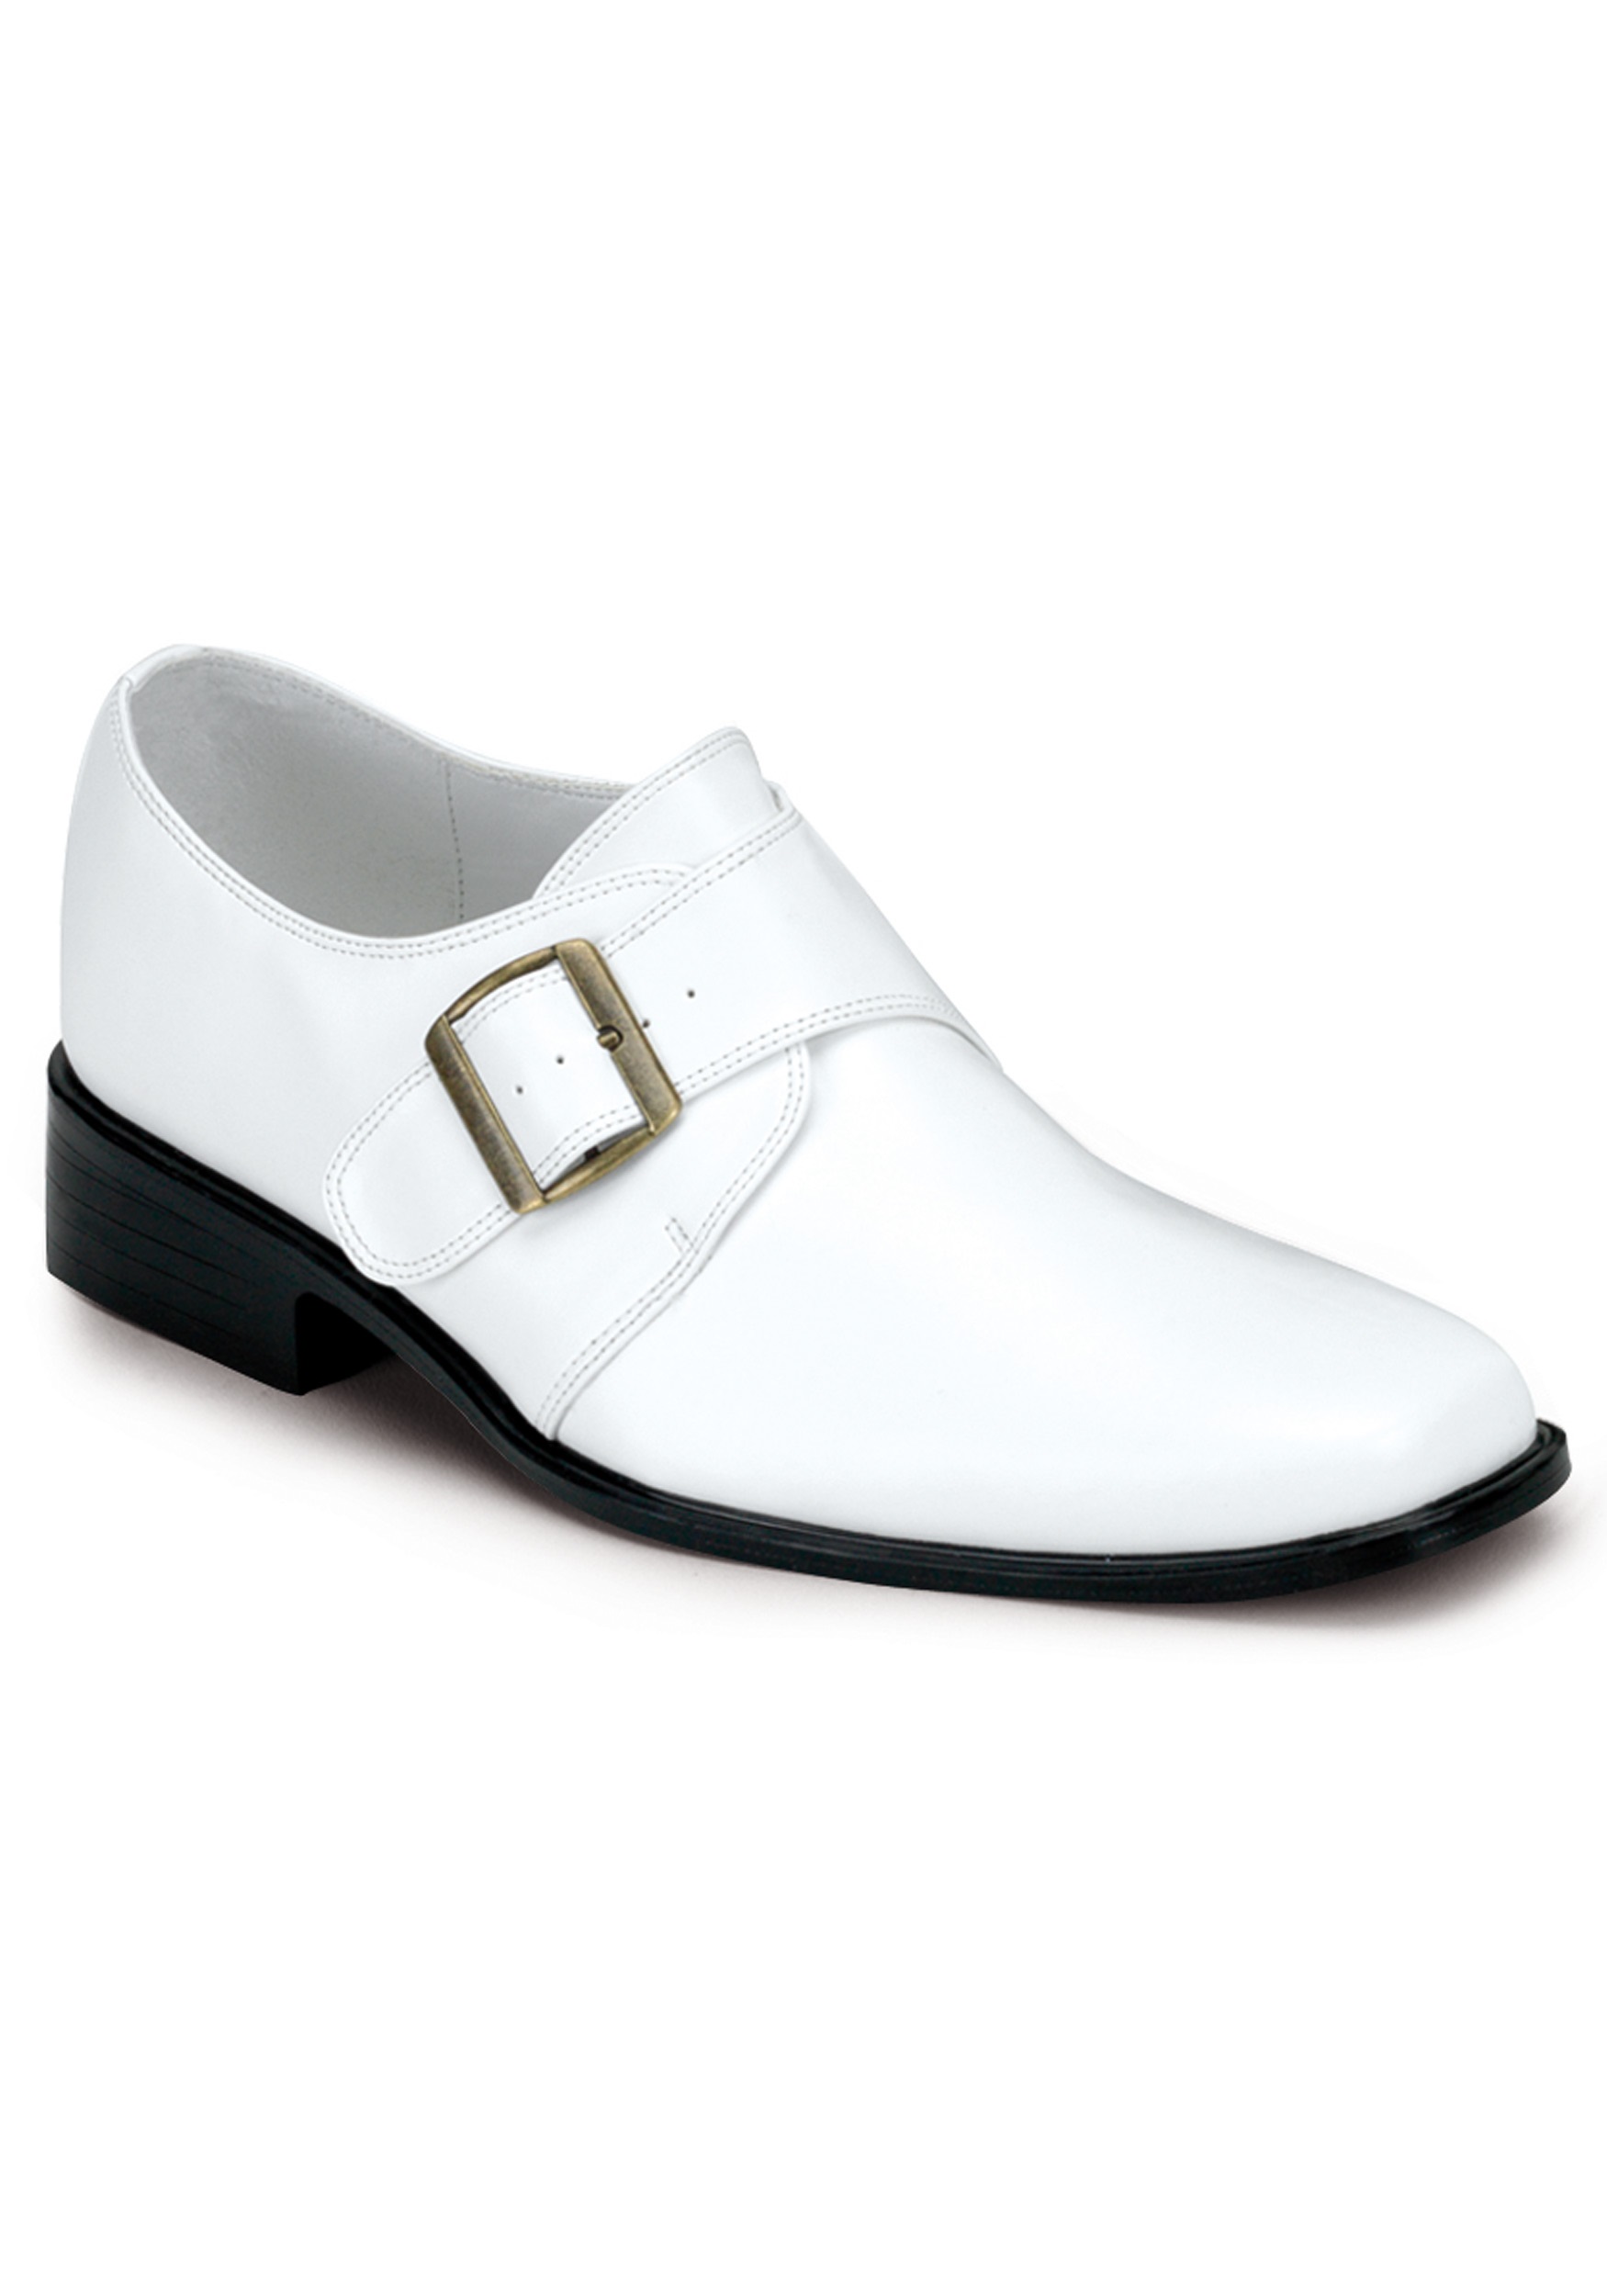 Mens Costume Disco Loafers